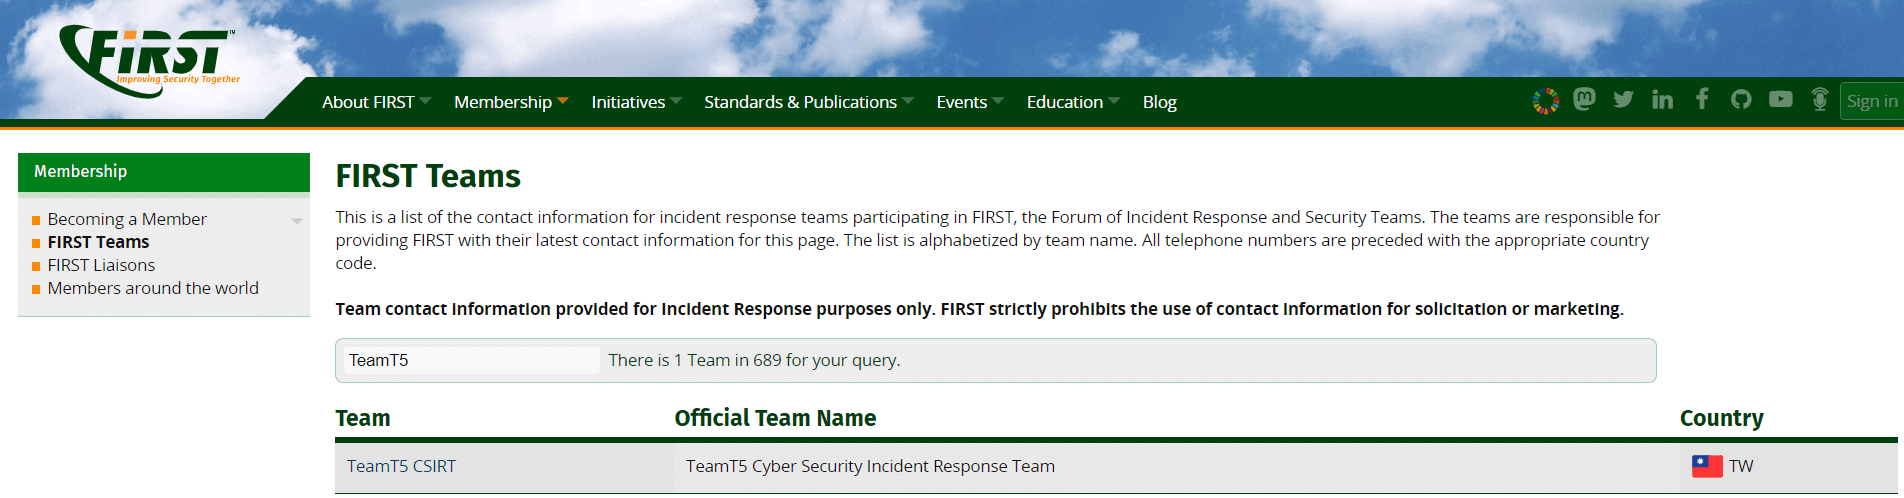 teamt5-joins-first-forum-of-incident-response-and-security-team_PIC.png